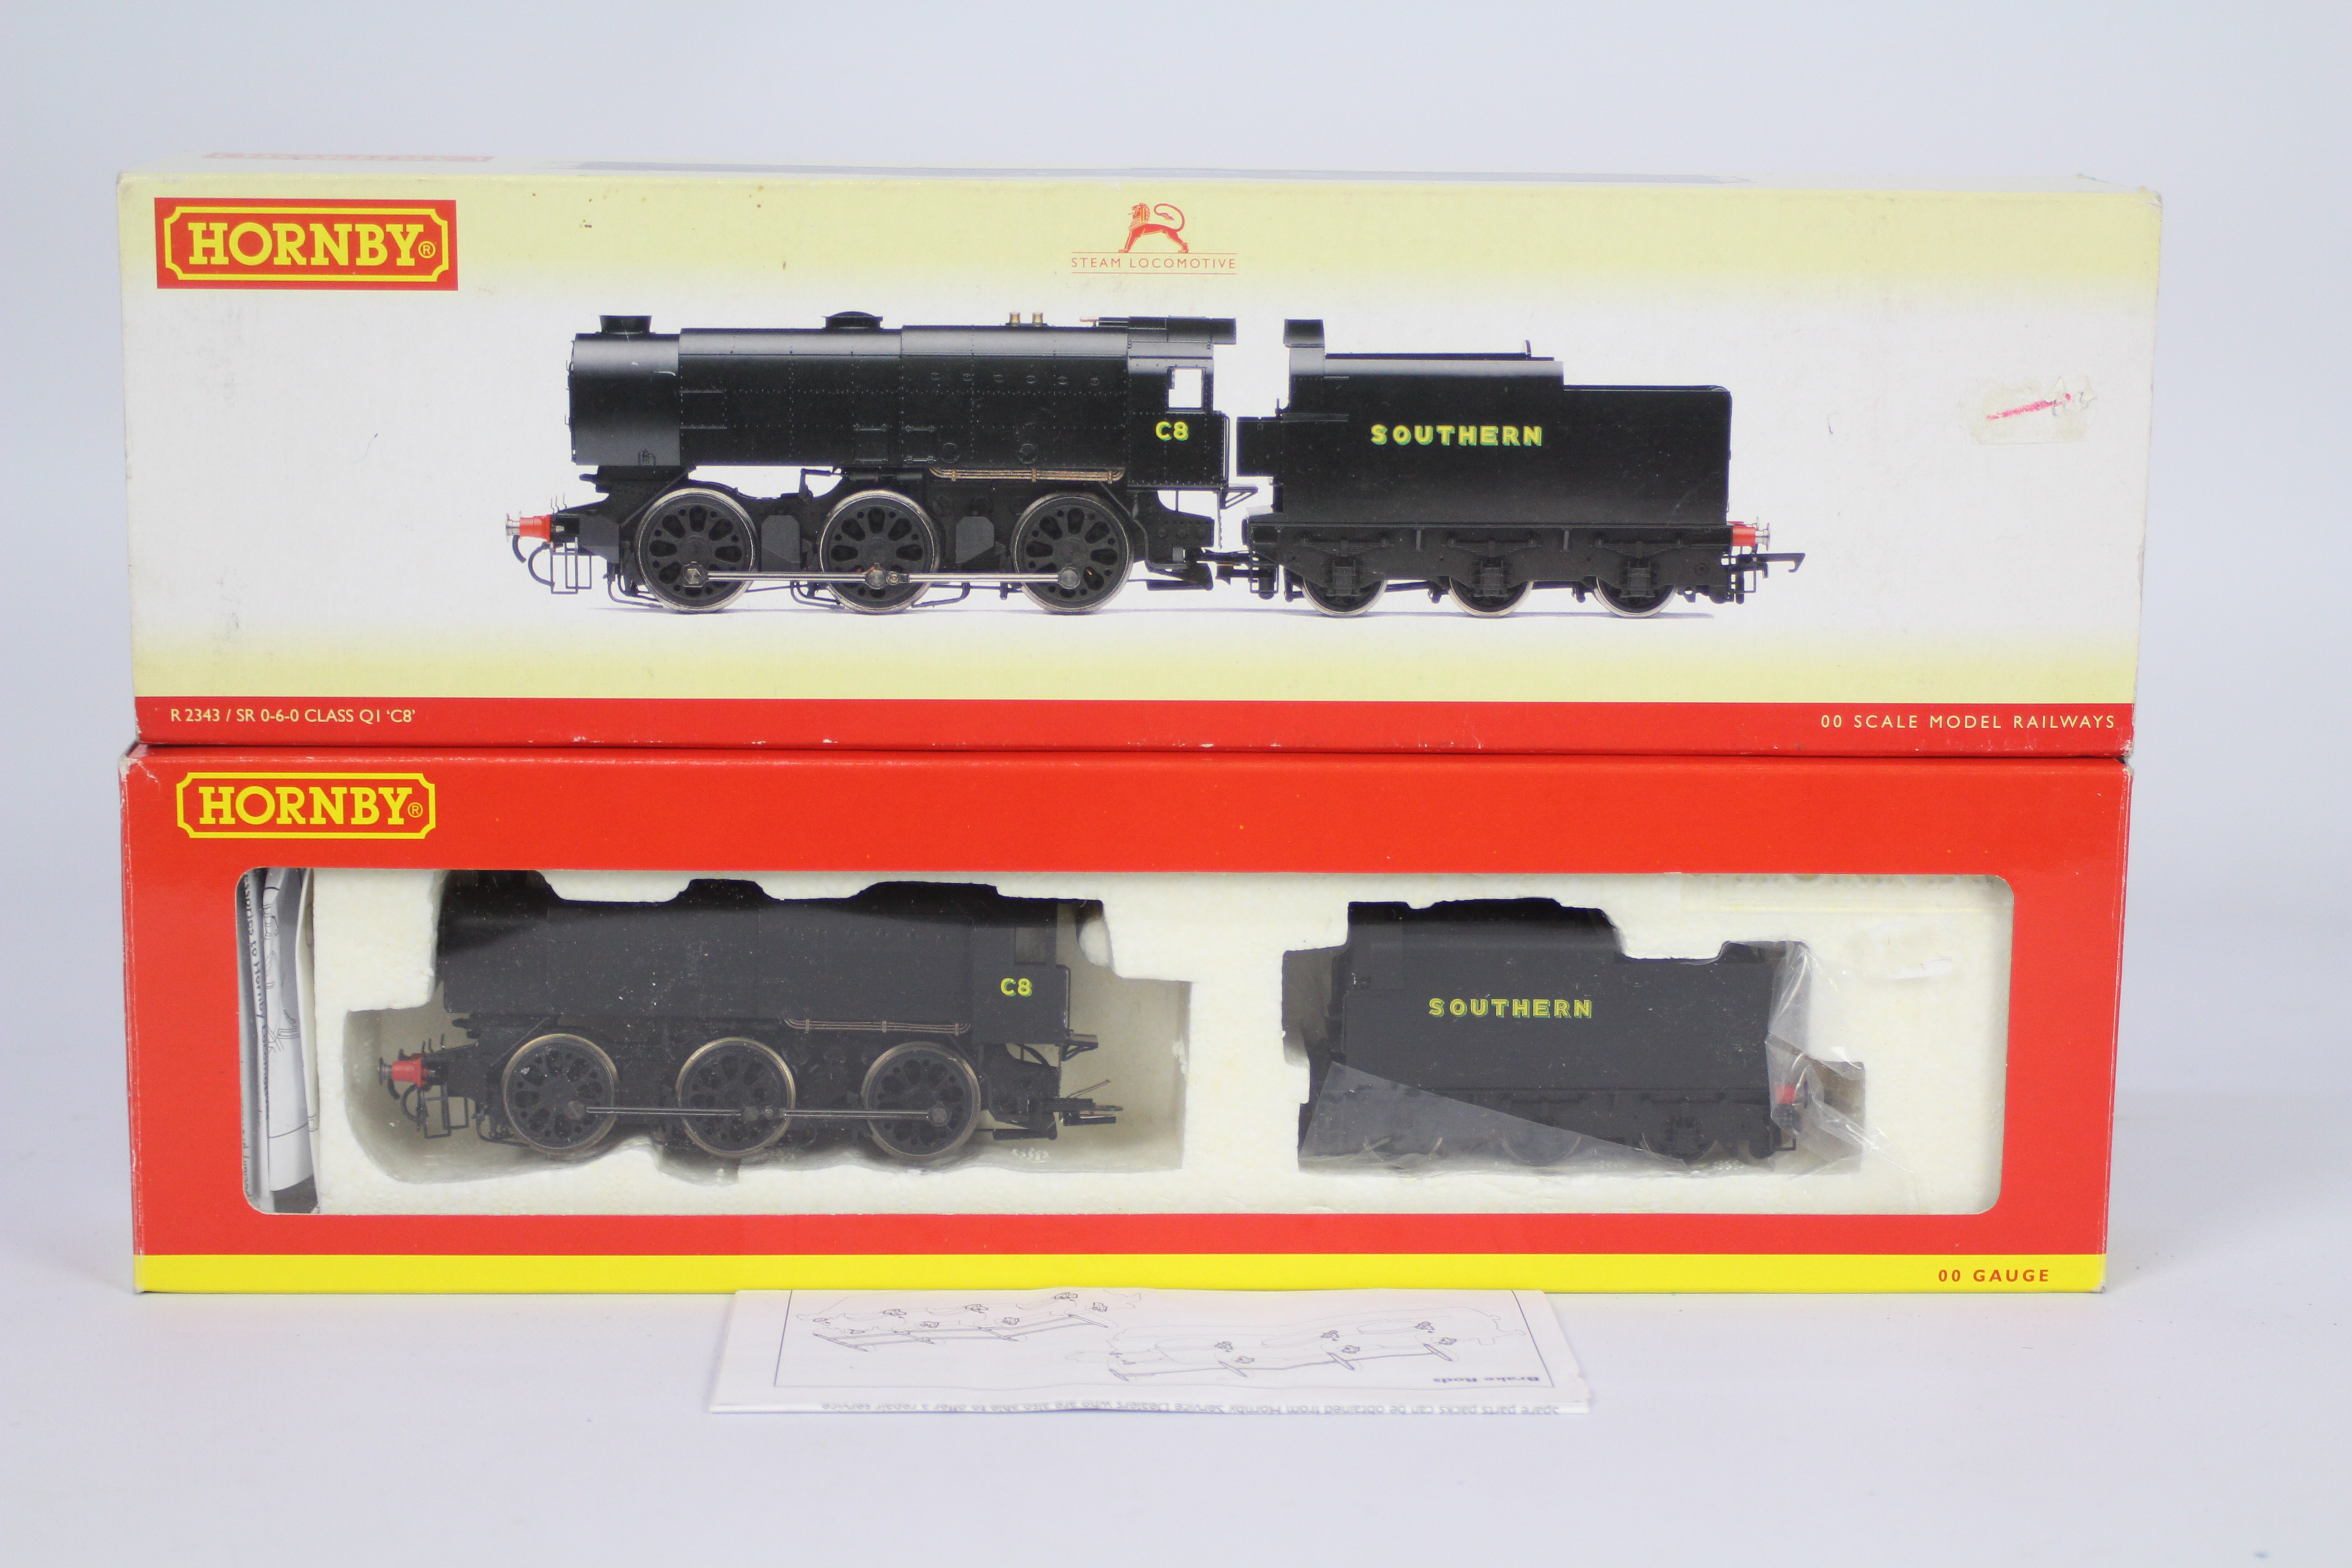 Hornby - A boxed Hornby OO gauge train - The #R2343 / SR 0-6-0 Class QI 'CB' train appears in